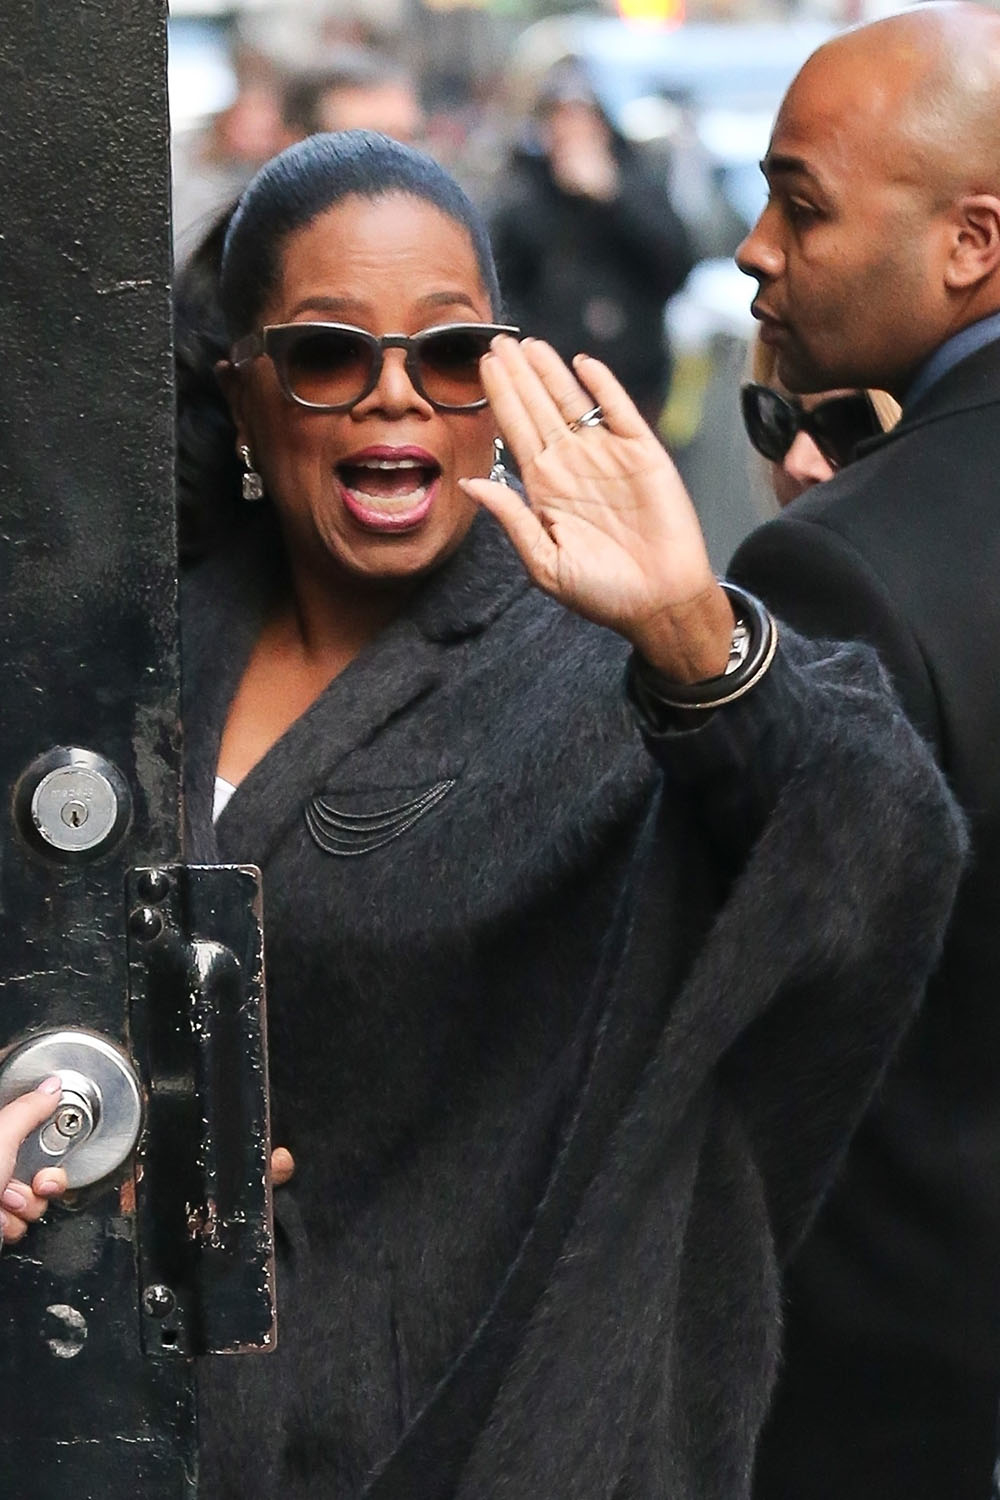 Oprah Winfrey seen arriving at The Late Show in NYC